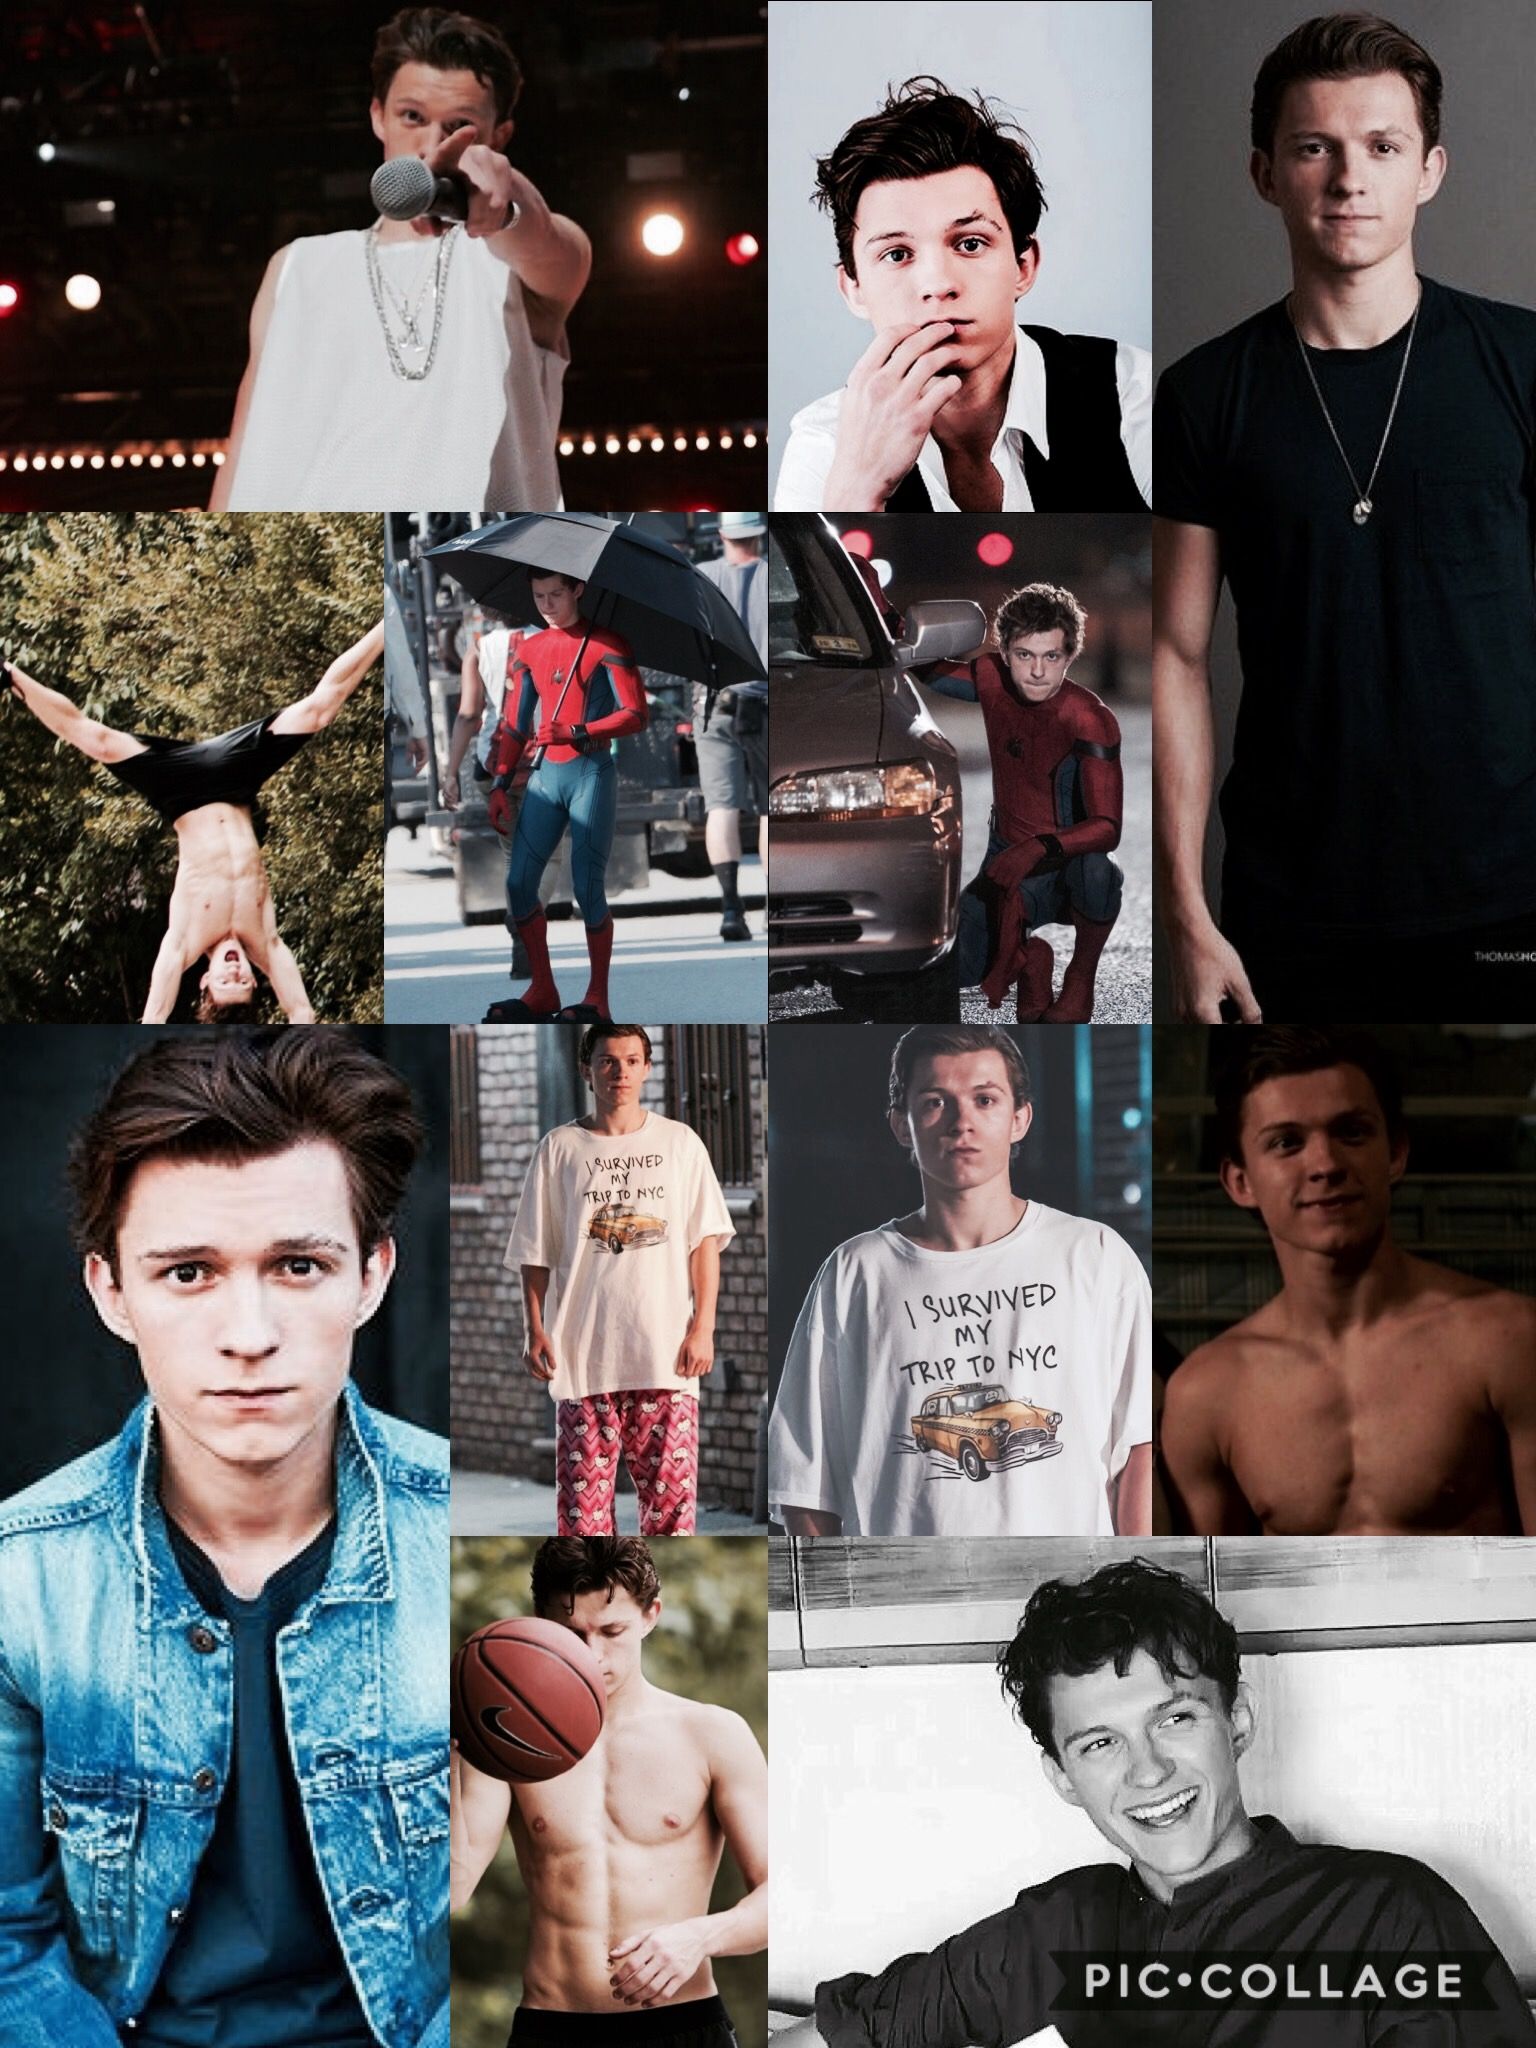 Here's a wallpaper for you guys ❤️. Tom holland spiderman, Tom holland peter parker, Tom holland